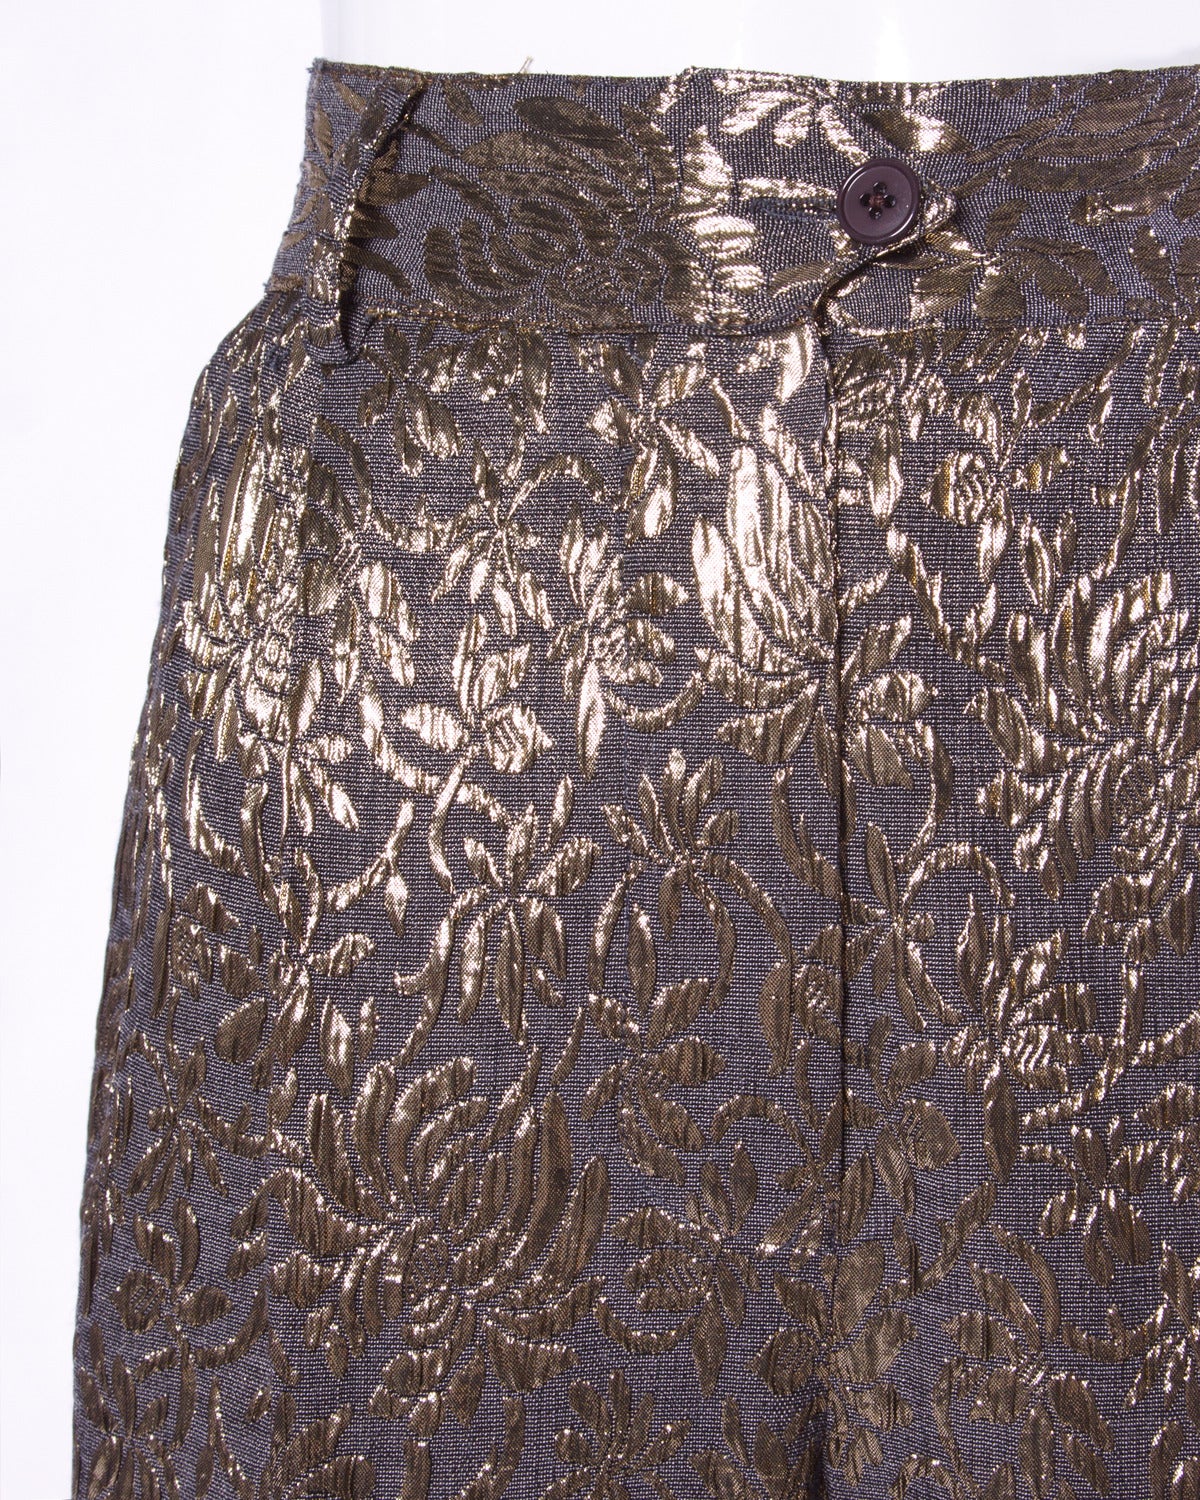 Vintage metallic brocade pants by Gianfranco Ferre. High waist and wide leg.

Details:

Unlined
Side Pockets
Front Button Closure
Color: Gold/ Dark Gray
Fabric: Feels like Silk Blend
Label: Gianfranco Ferre

Measurements:

Waist: